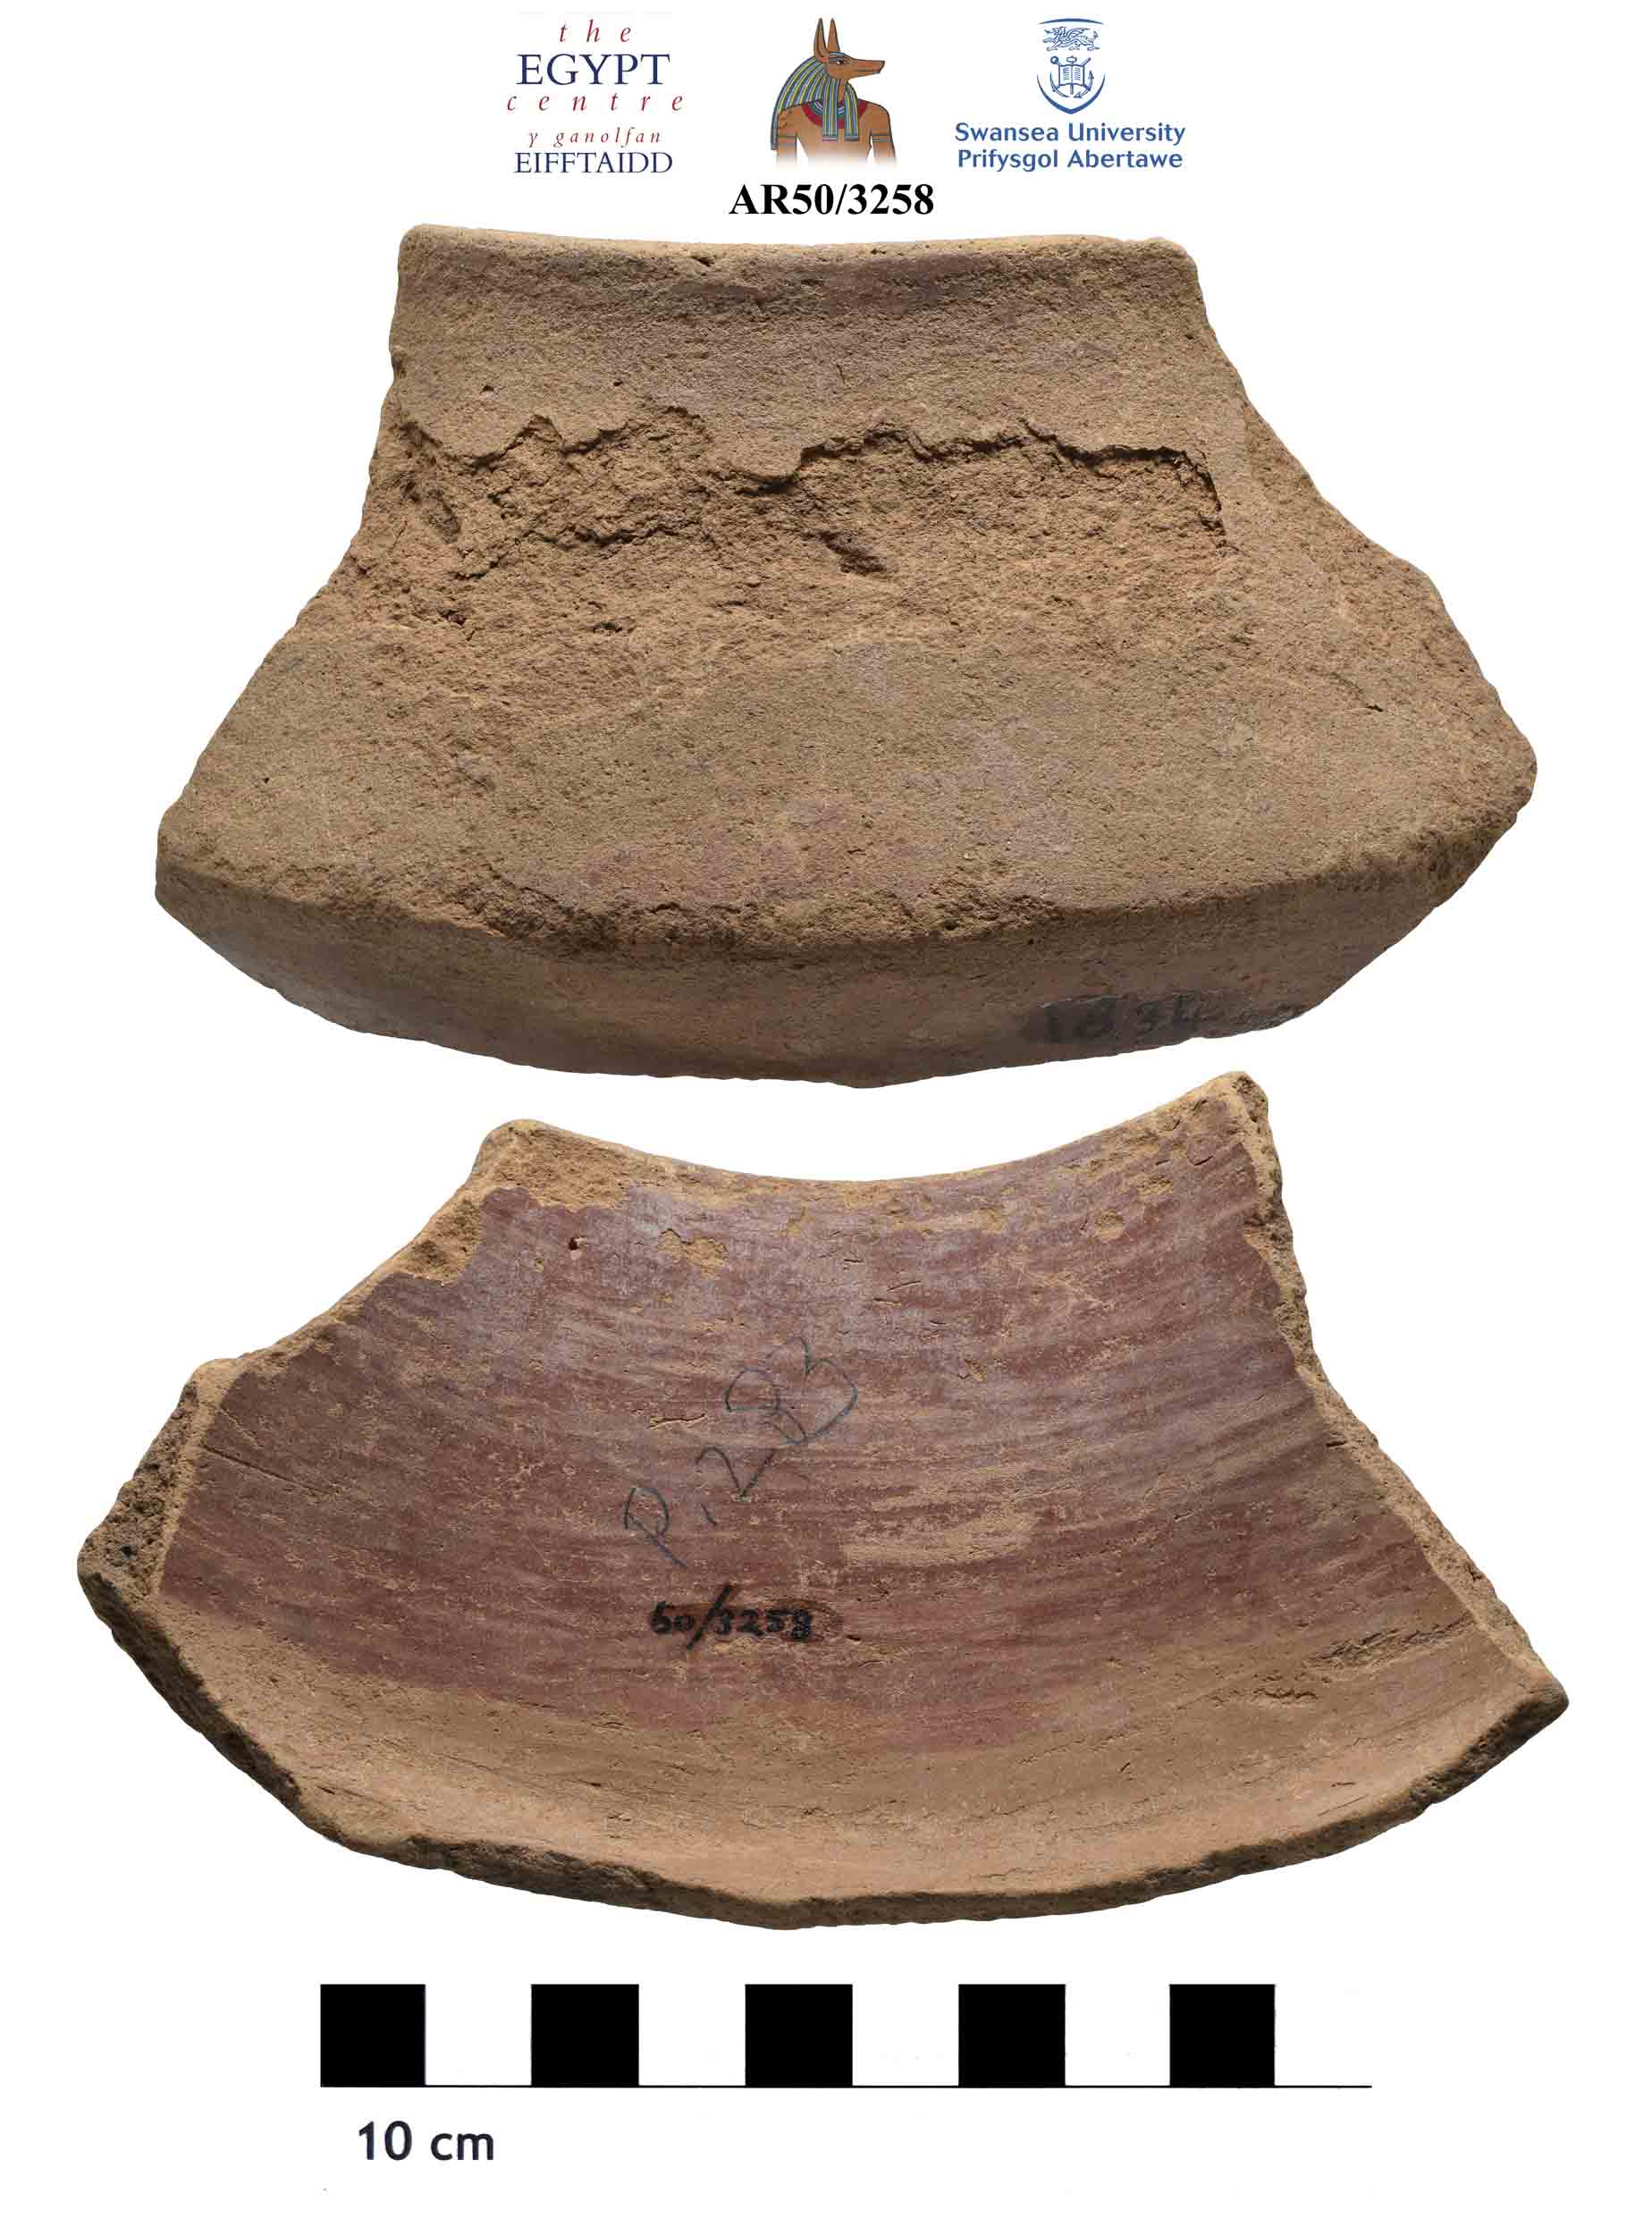 Image for: Sherd of a pottery bowl